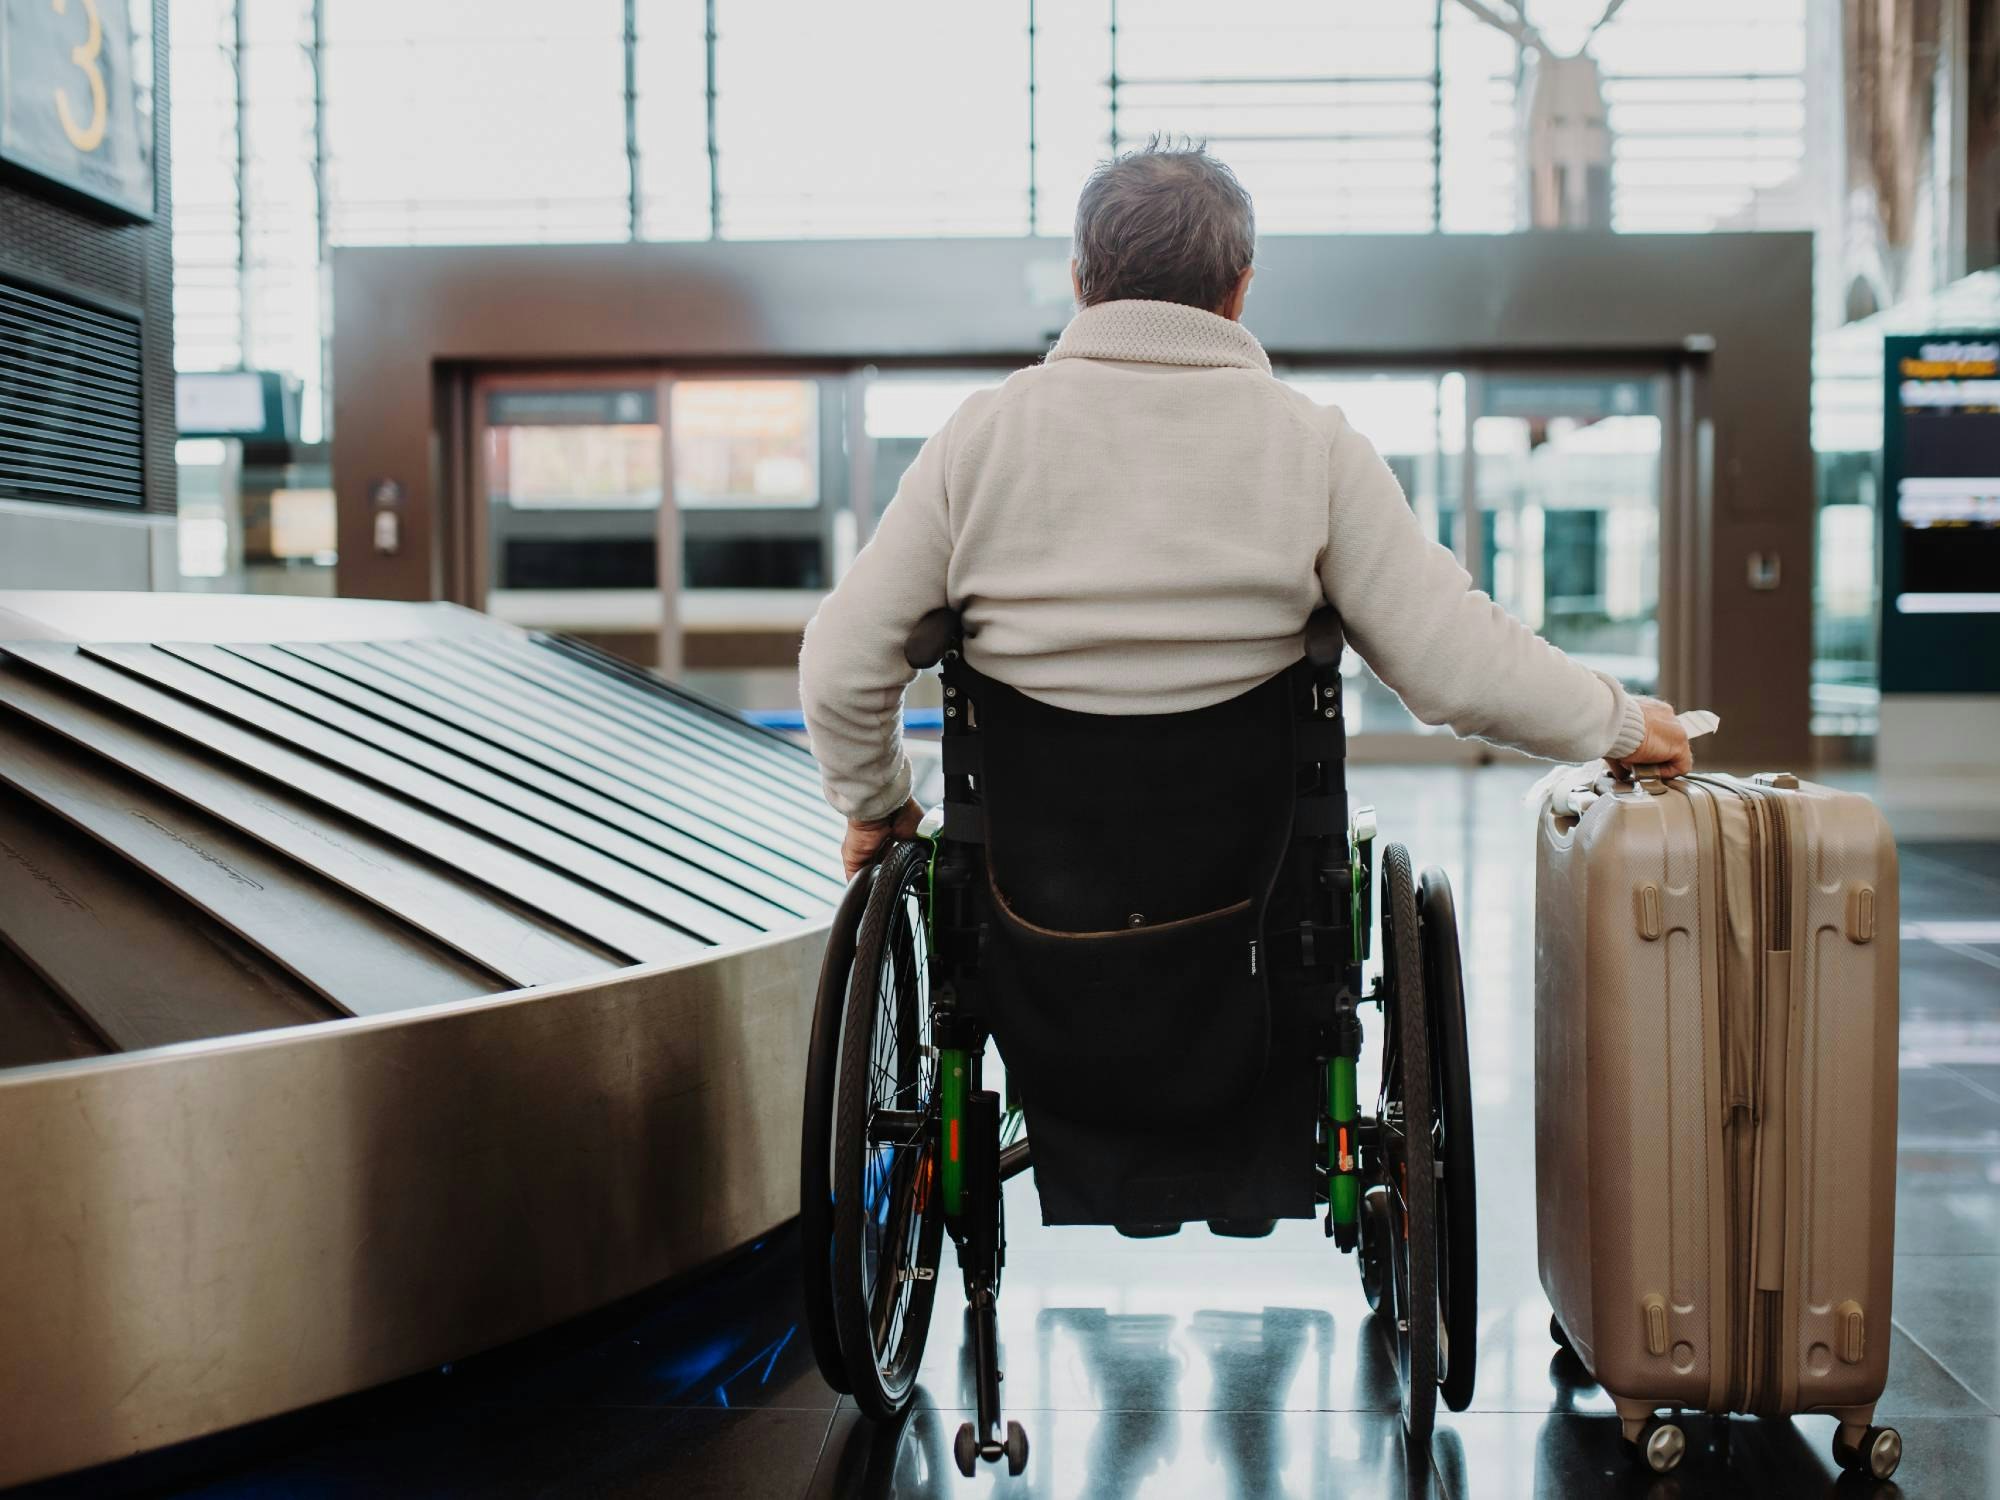 New EU travelling rules to improve experiences for passengers with disabilities